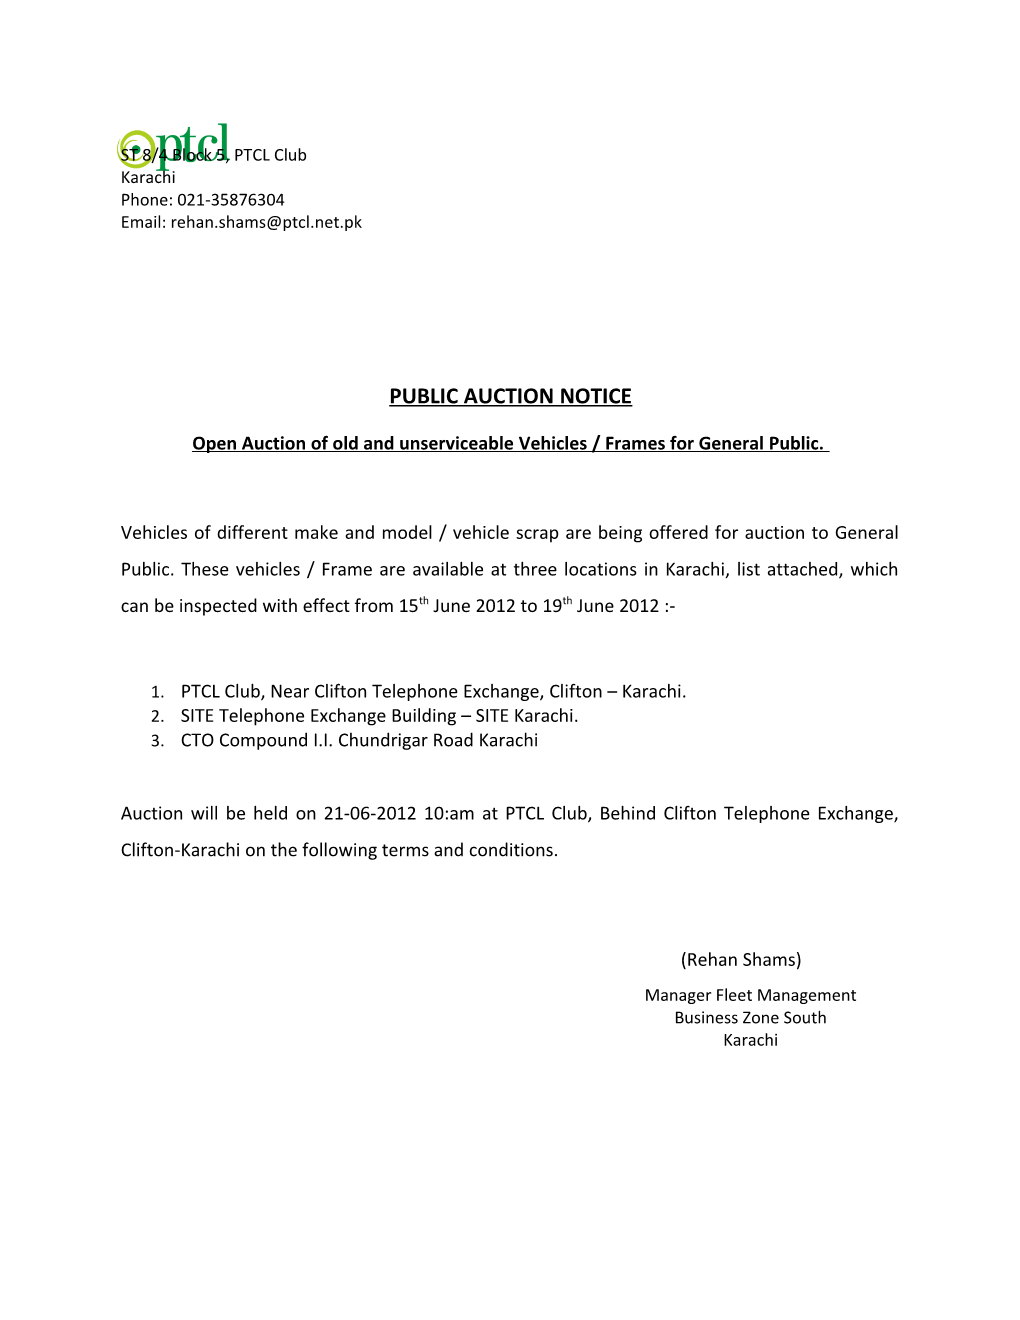 Open Auction of Old and Unserviceable Vehicles / Frames for General Public s1